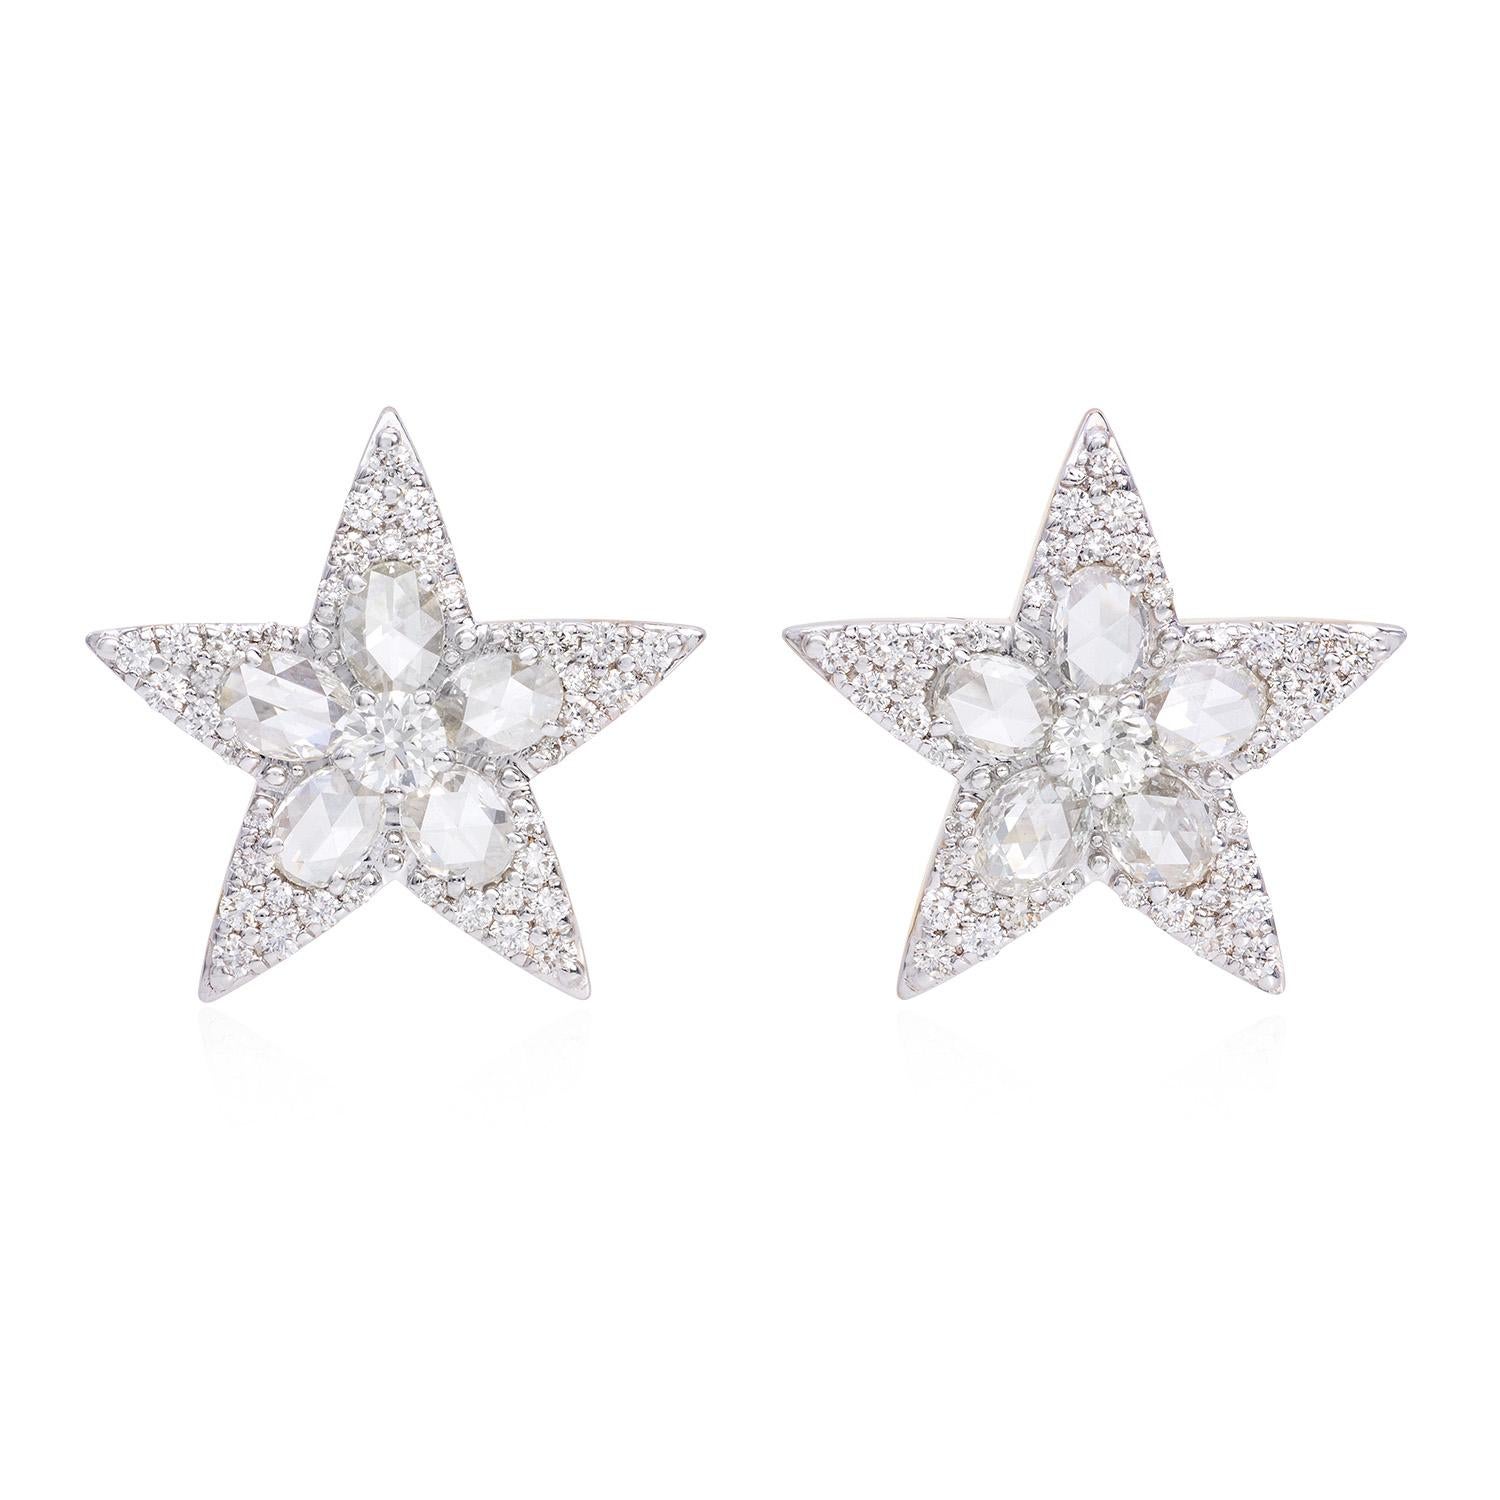 Introducing The Sydney:

The Sydney earrings feature a playful modern design of a star, worked in the finest and longest lasting 18K gold, meant to last you a lifetime. Each of the stars have a beautiful 1.40 carats of marquise diamonds as the